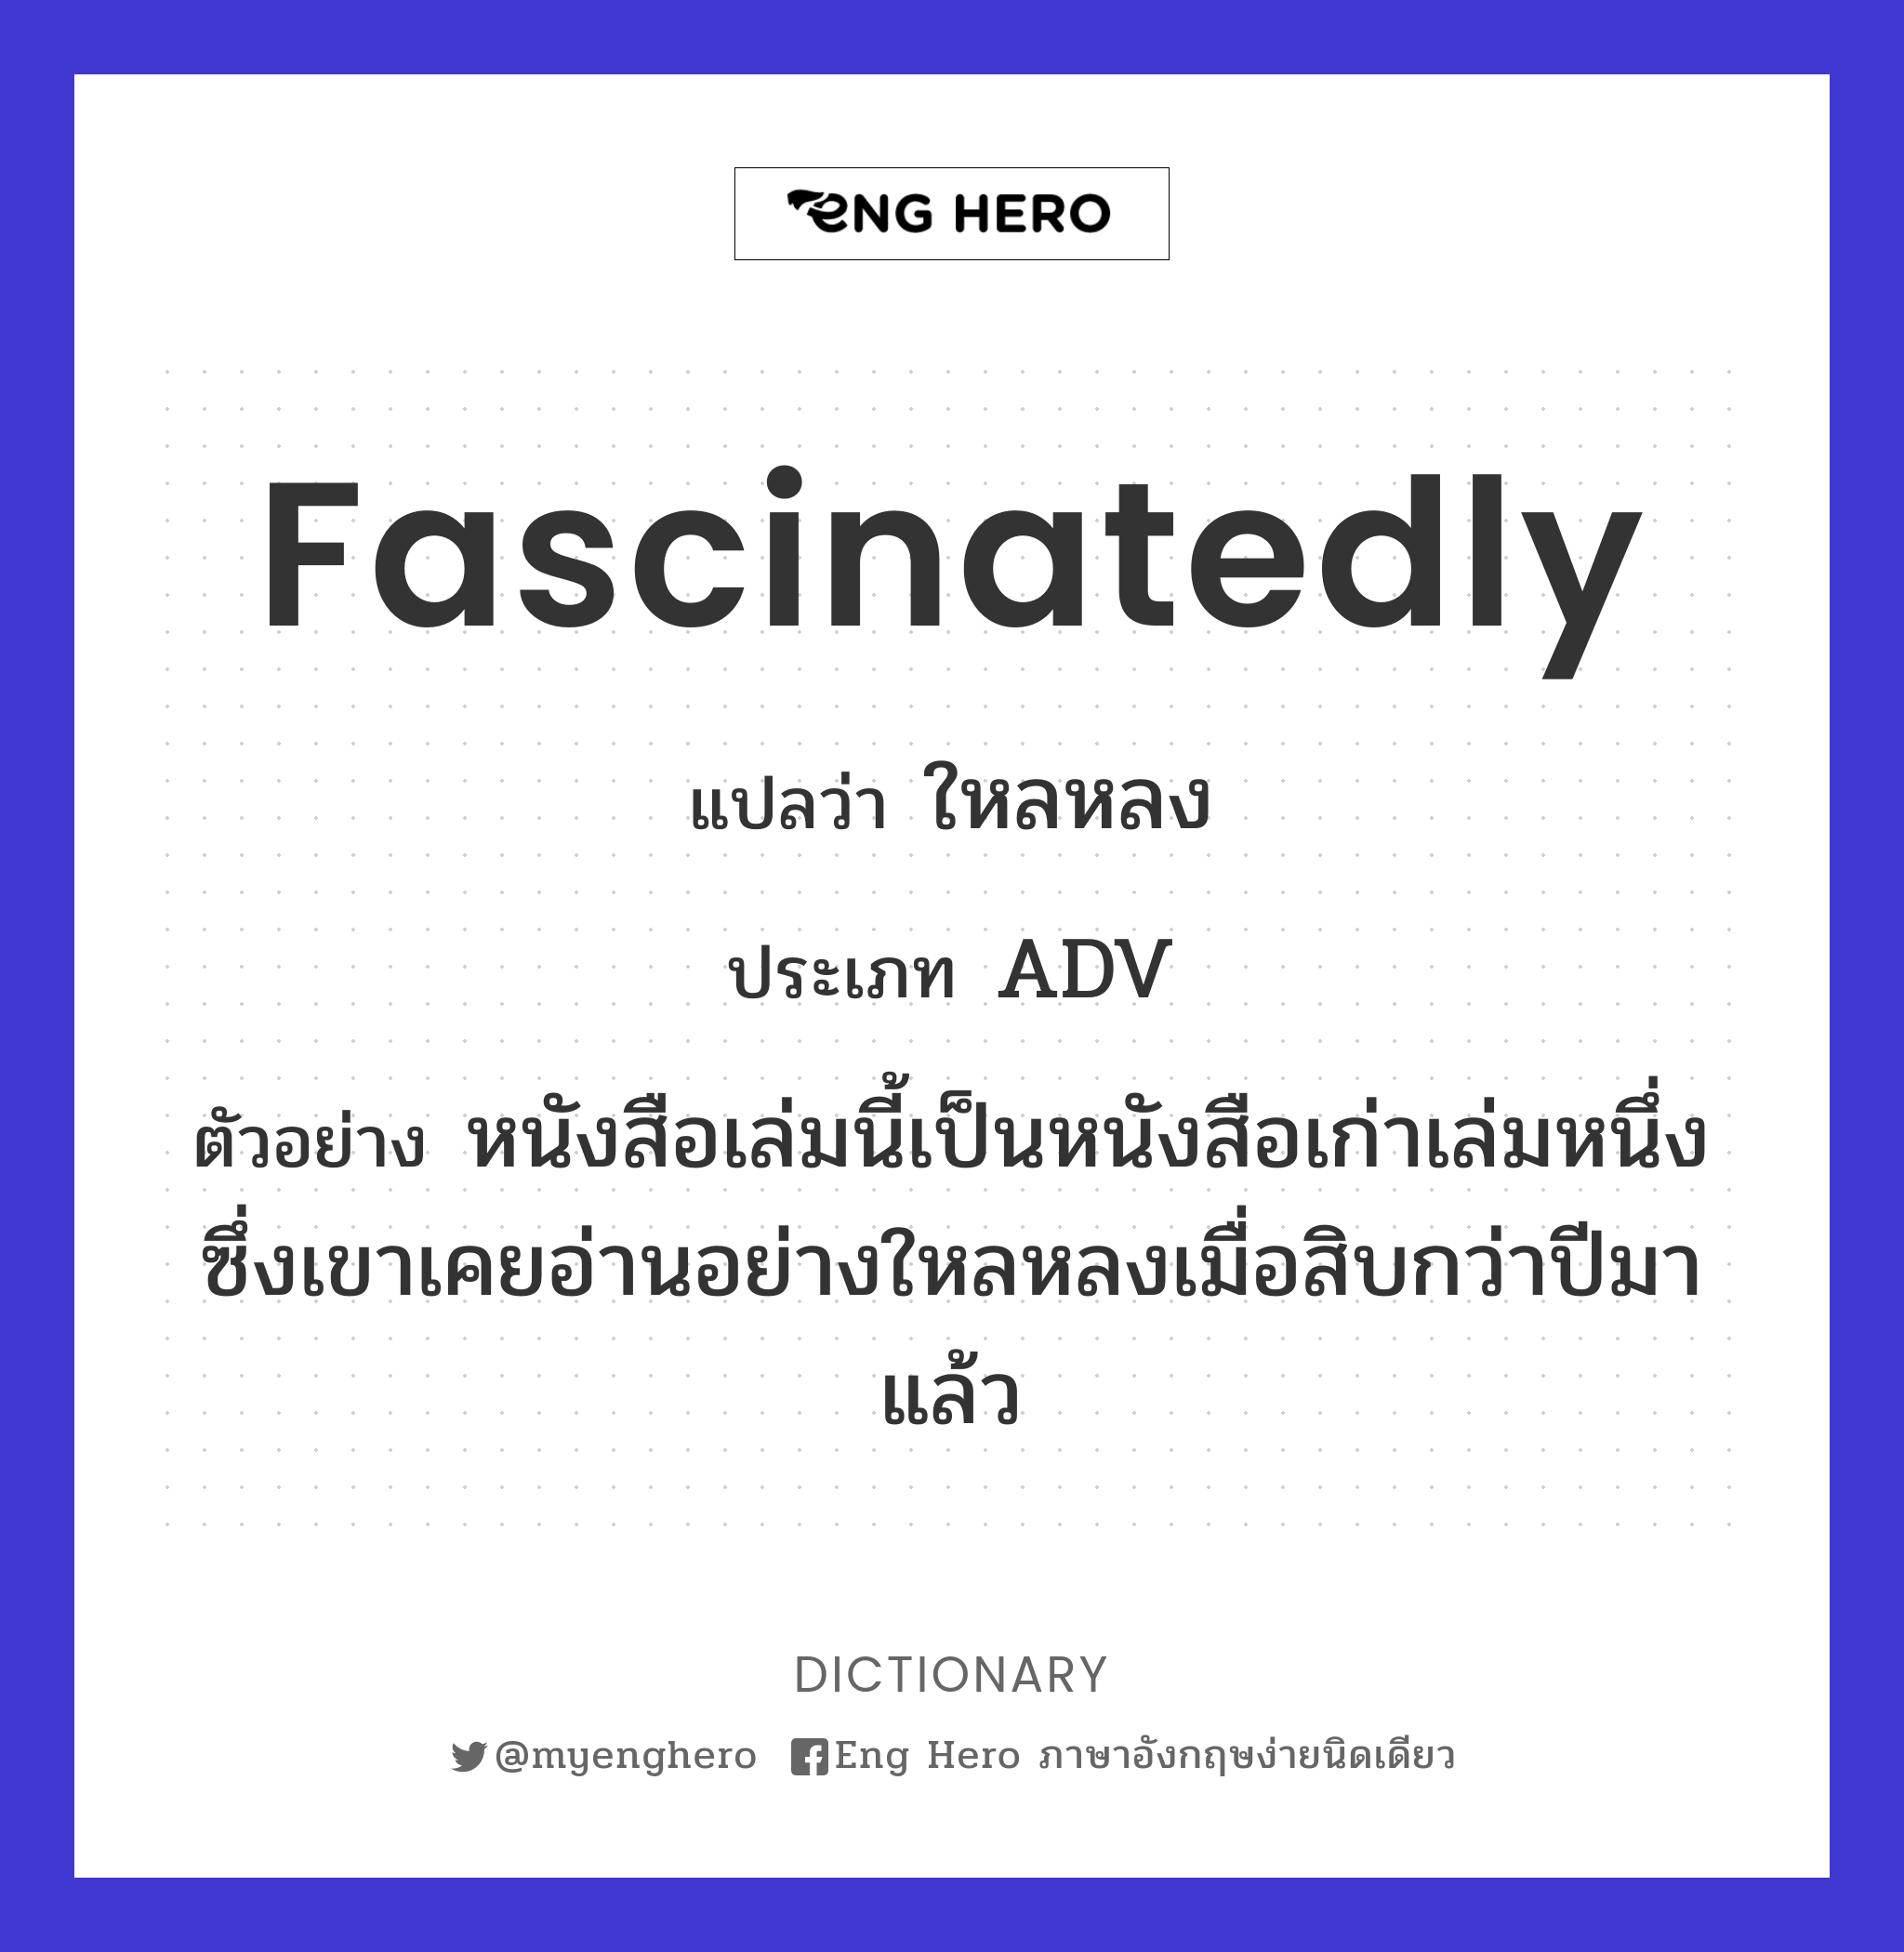 fascinatedly